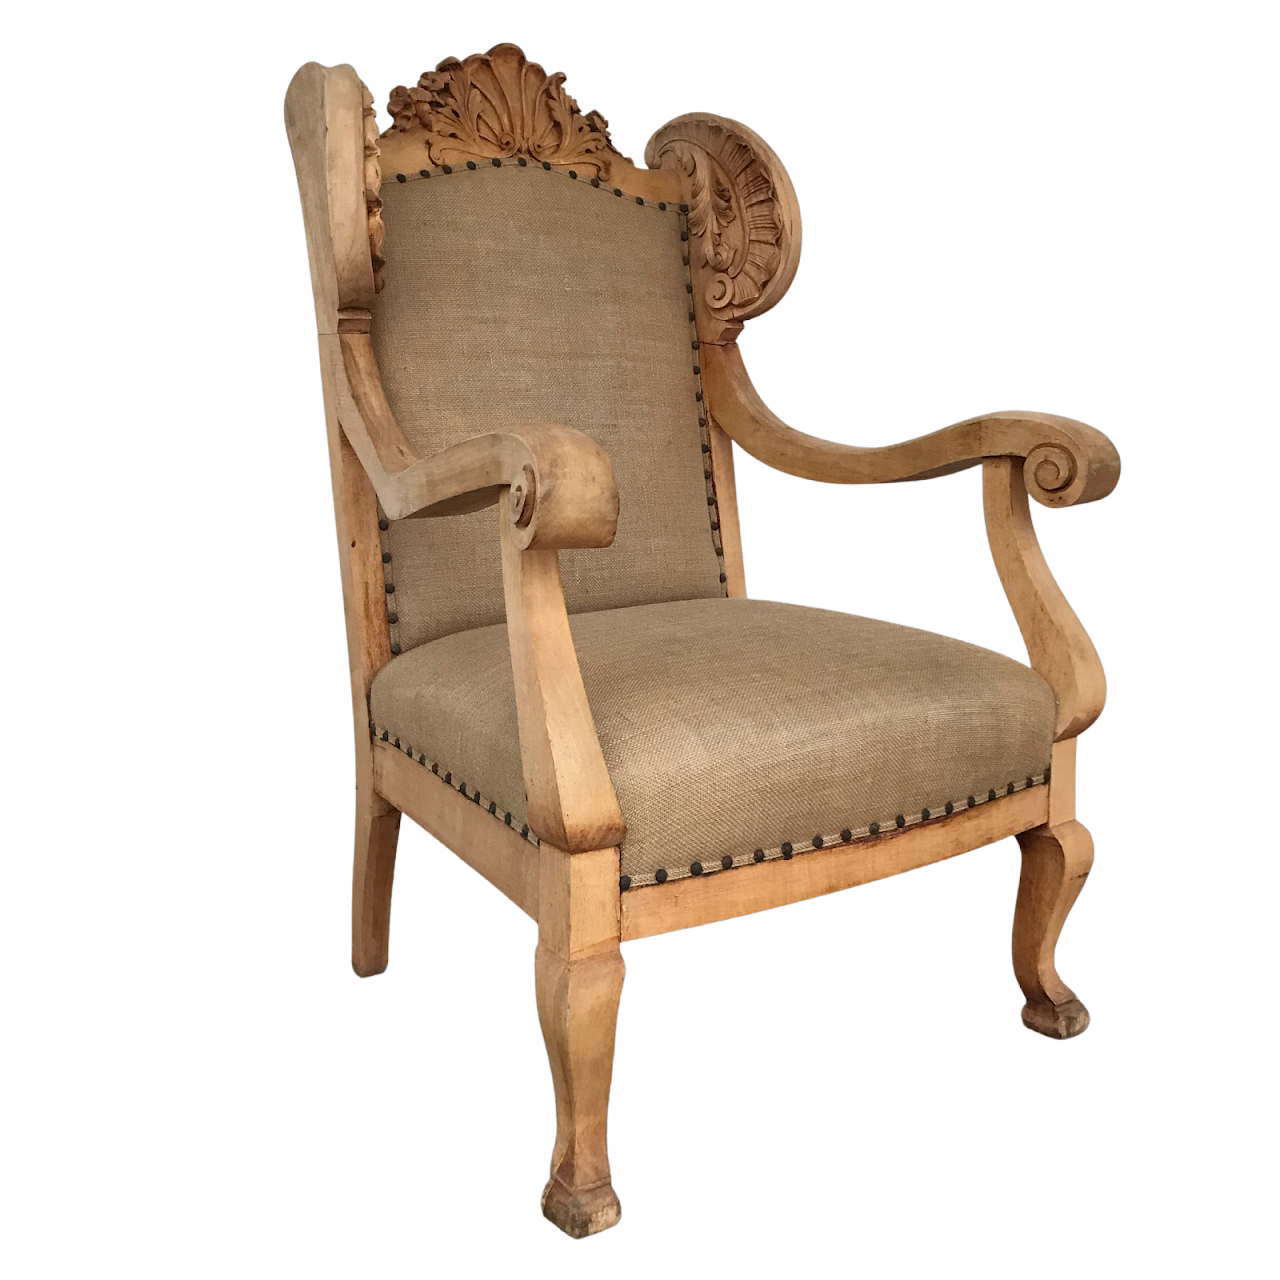 Carved Refinished Antique Wing Chair